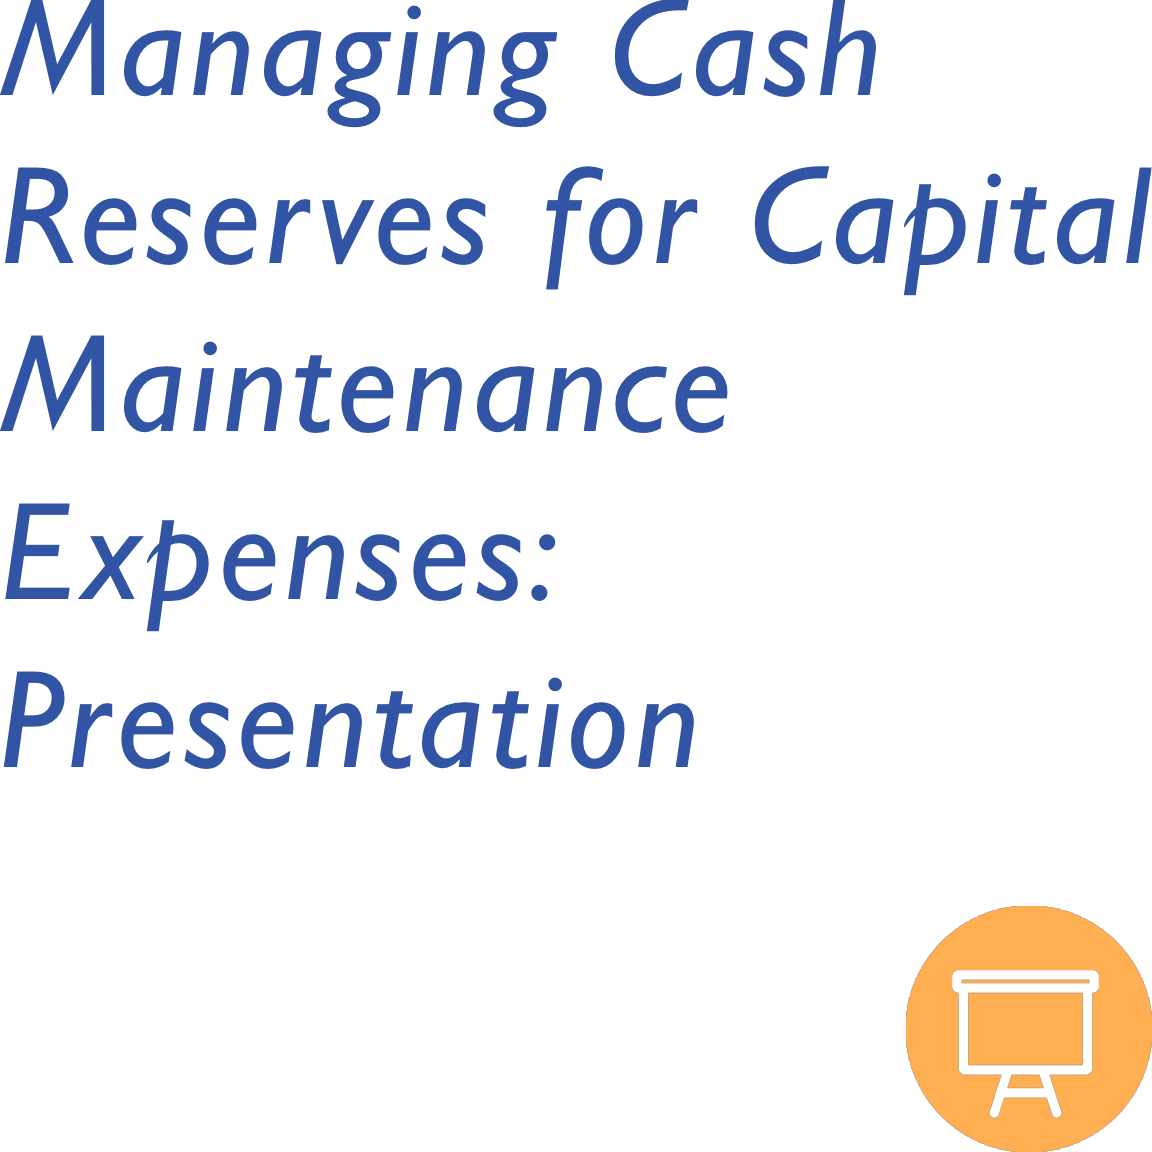 Managing Cash Reserves for Capital Maintenance Expenses